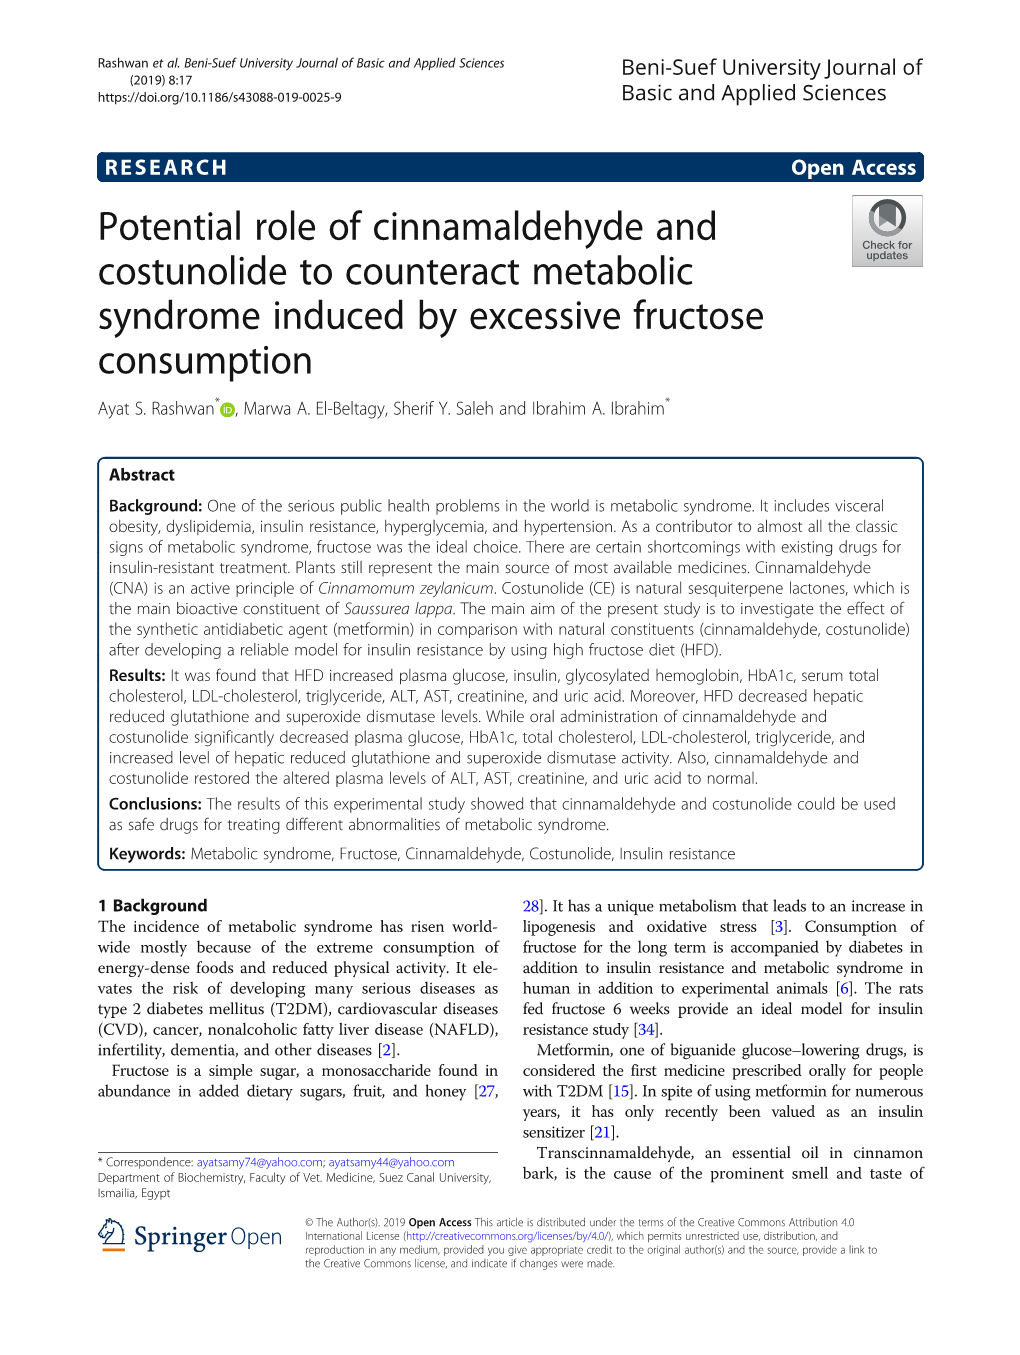 Potential Role of Cinnamaldehyde and Costunolide to Counteract Metabolic Syndrome Induced by Excessive Fructose Consumption Ayat S